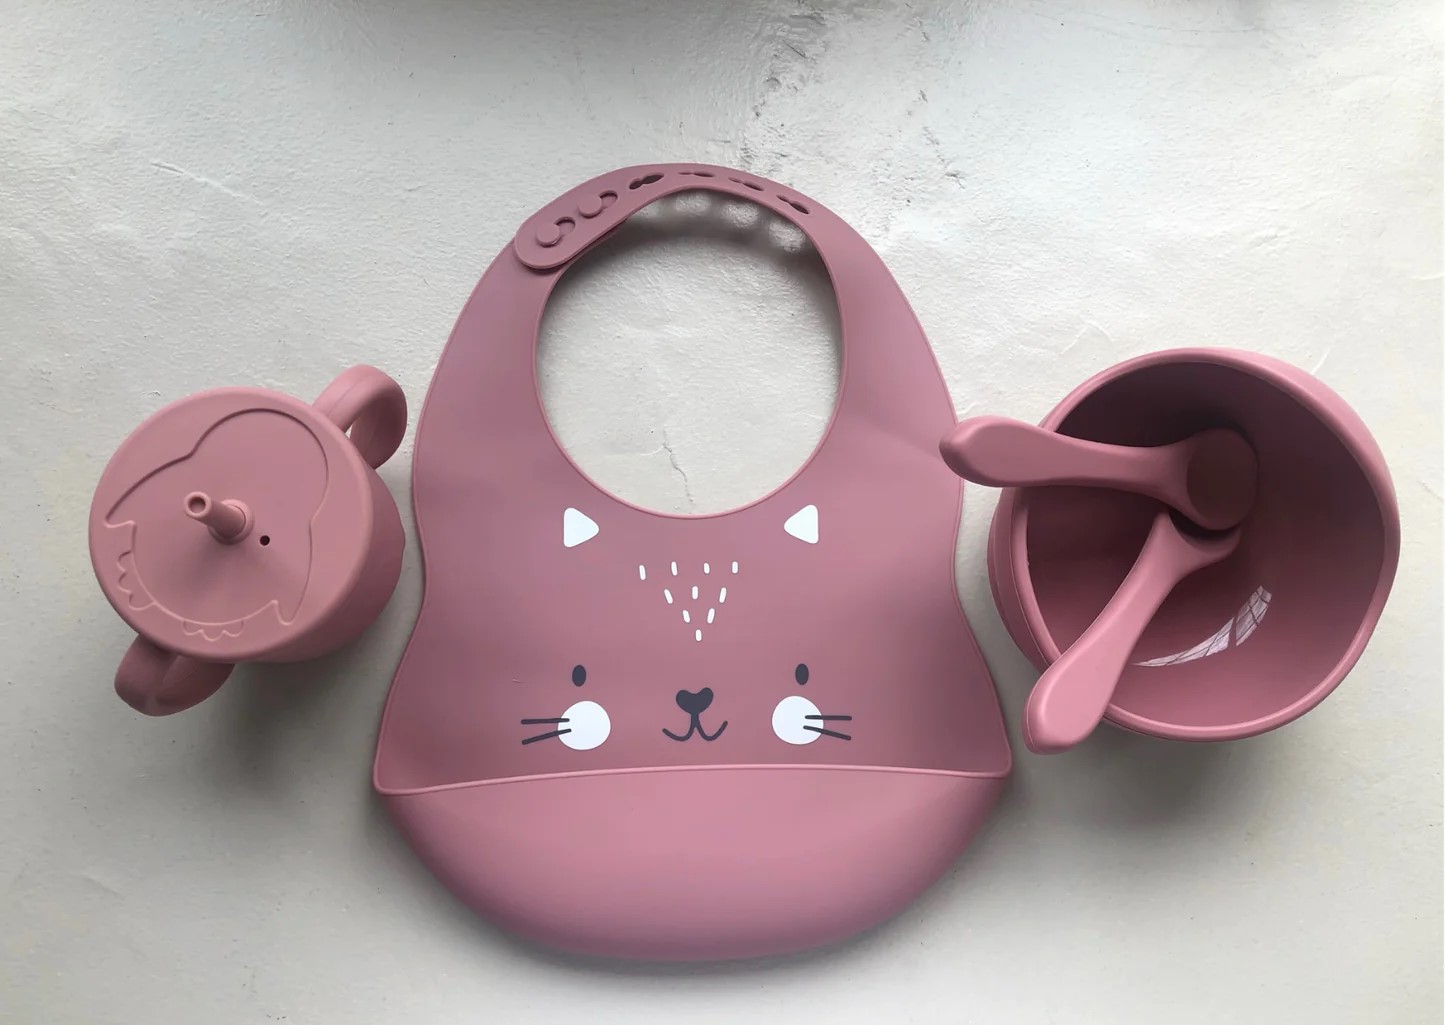 Silicone Feeding Set Review: A Must-Have for Easy Mealtime